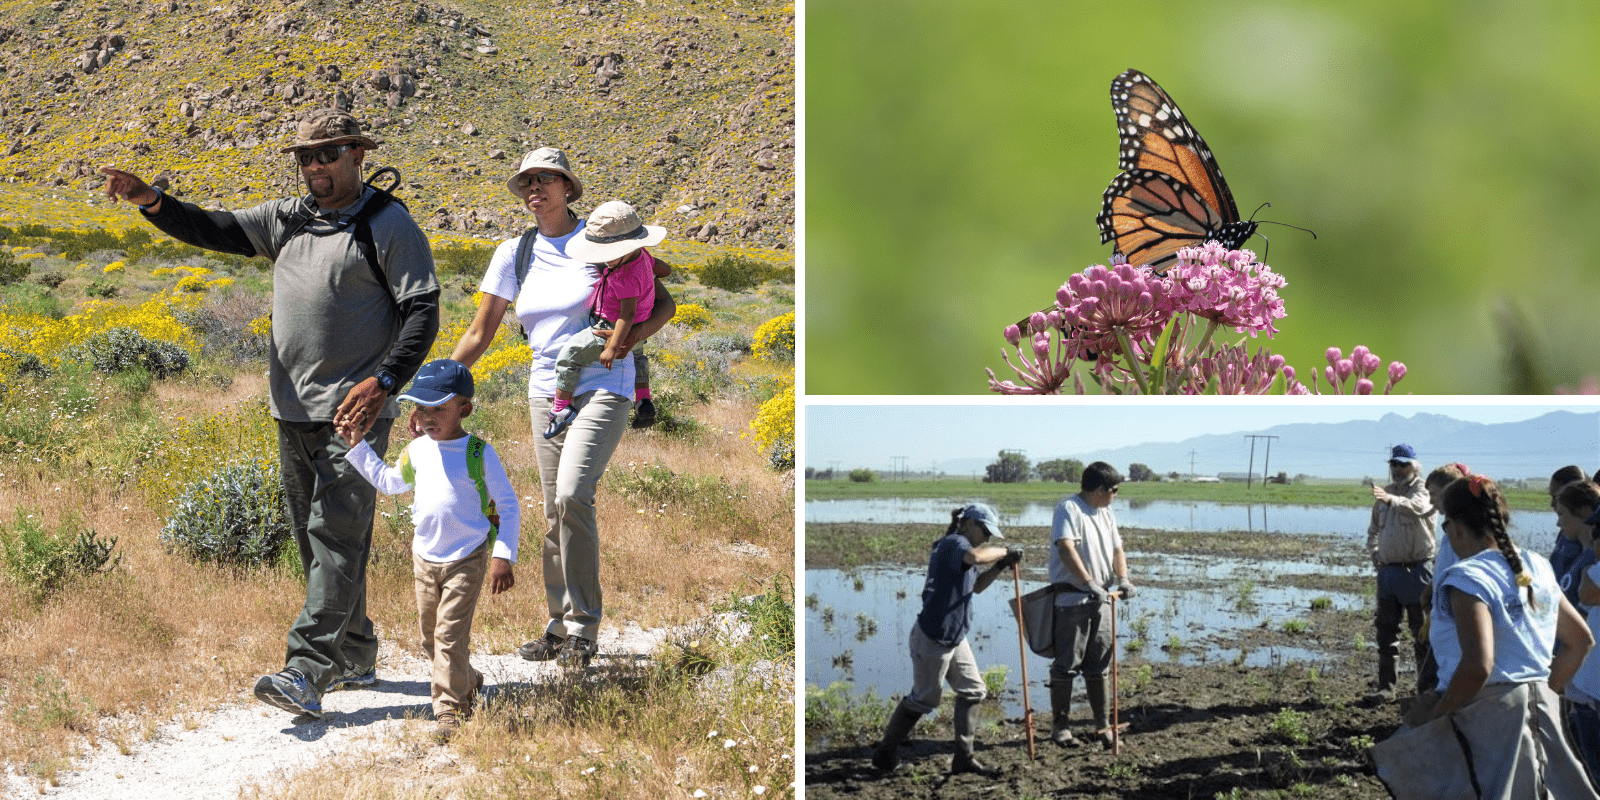 image 1, family hiking, image 2, butterfly, image 3, volunteers working outdoors